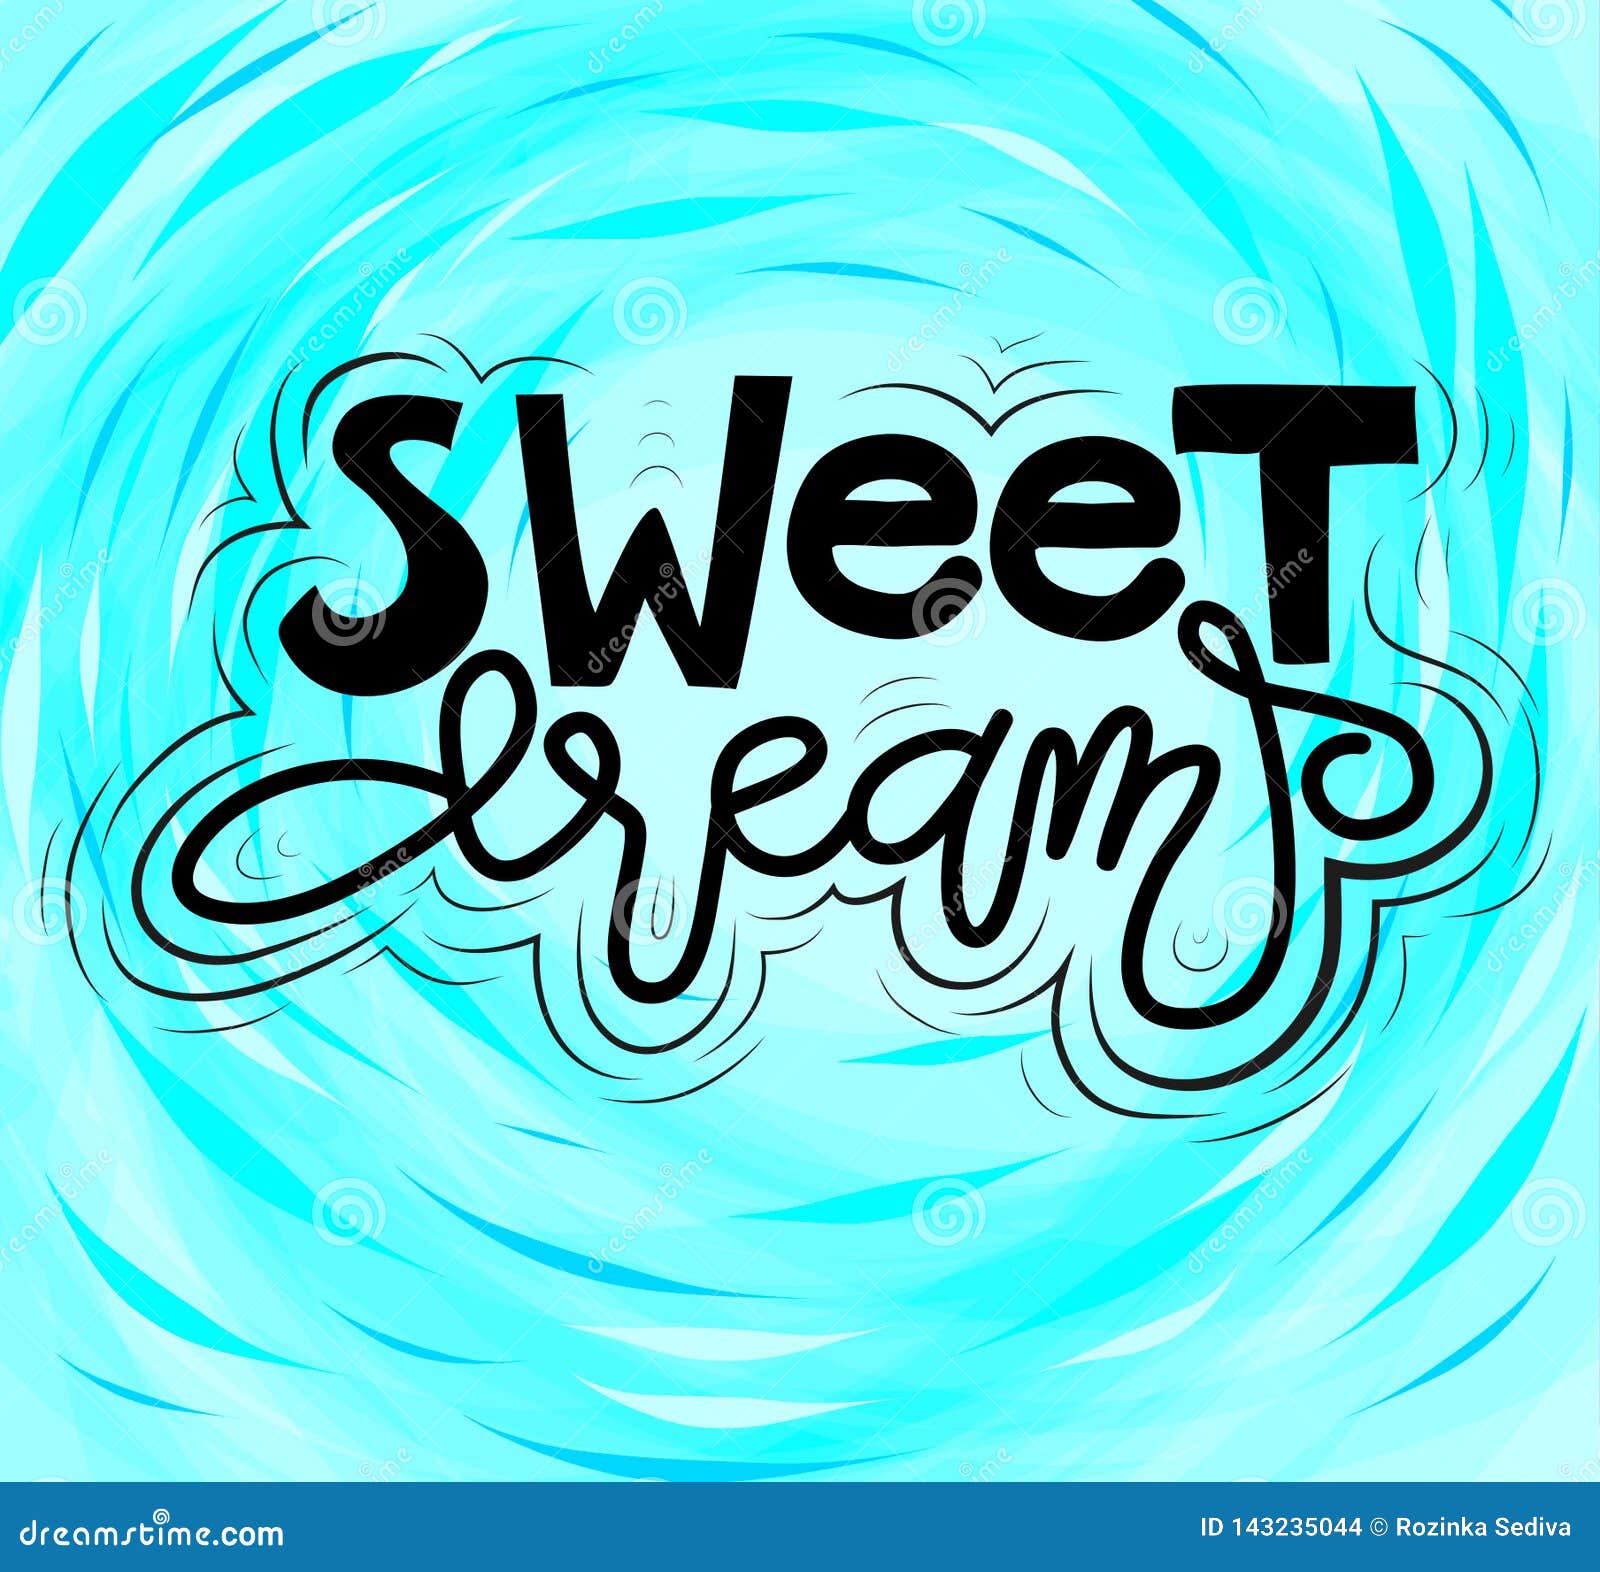 Sign Sweet Dreams, Hand Drawn Type. Vector. Stock Illustration